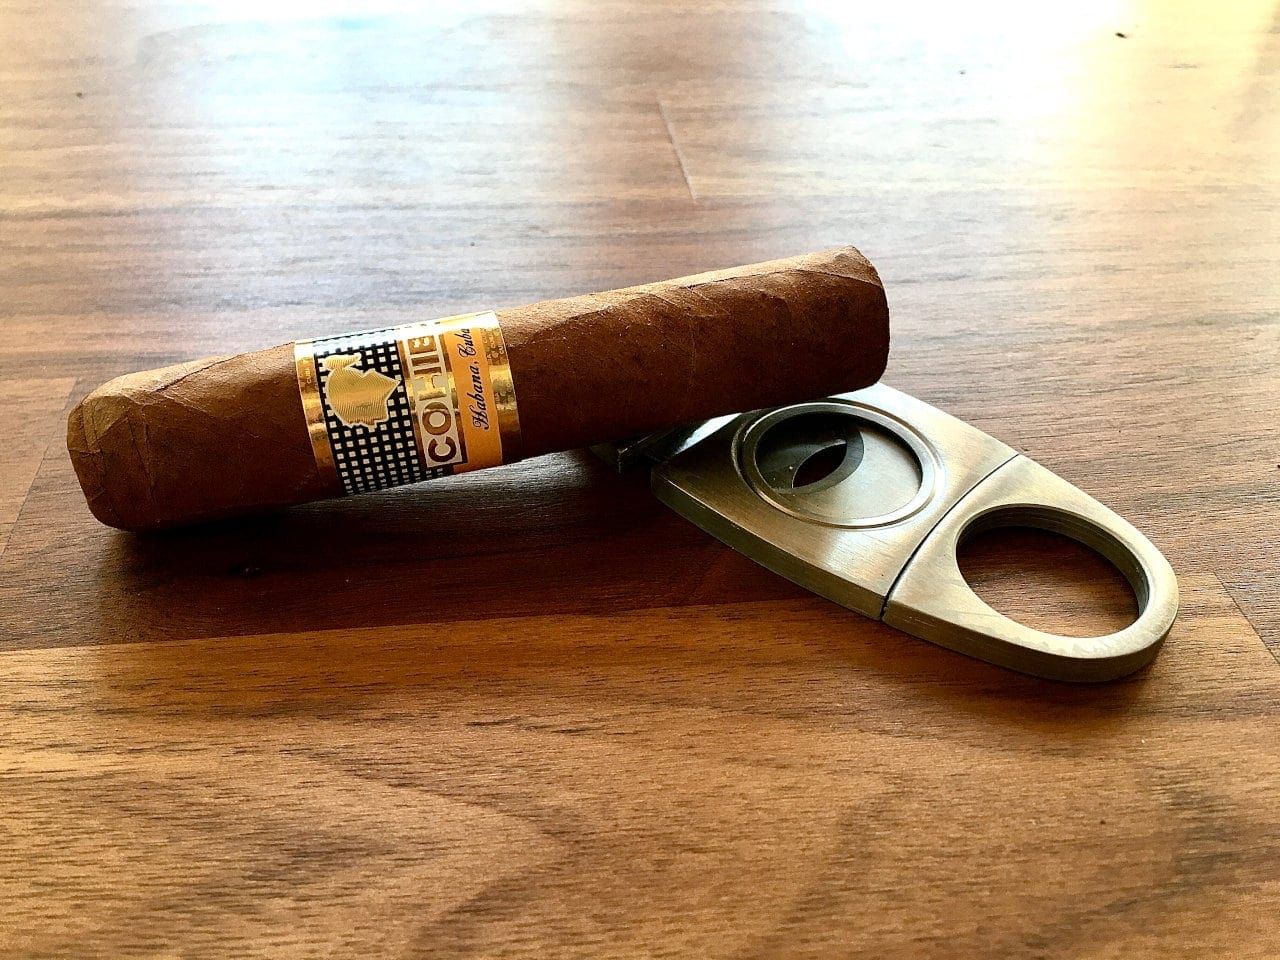 Stainless Steel Cutter And Cohiba